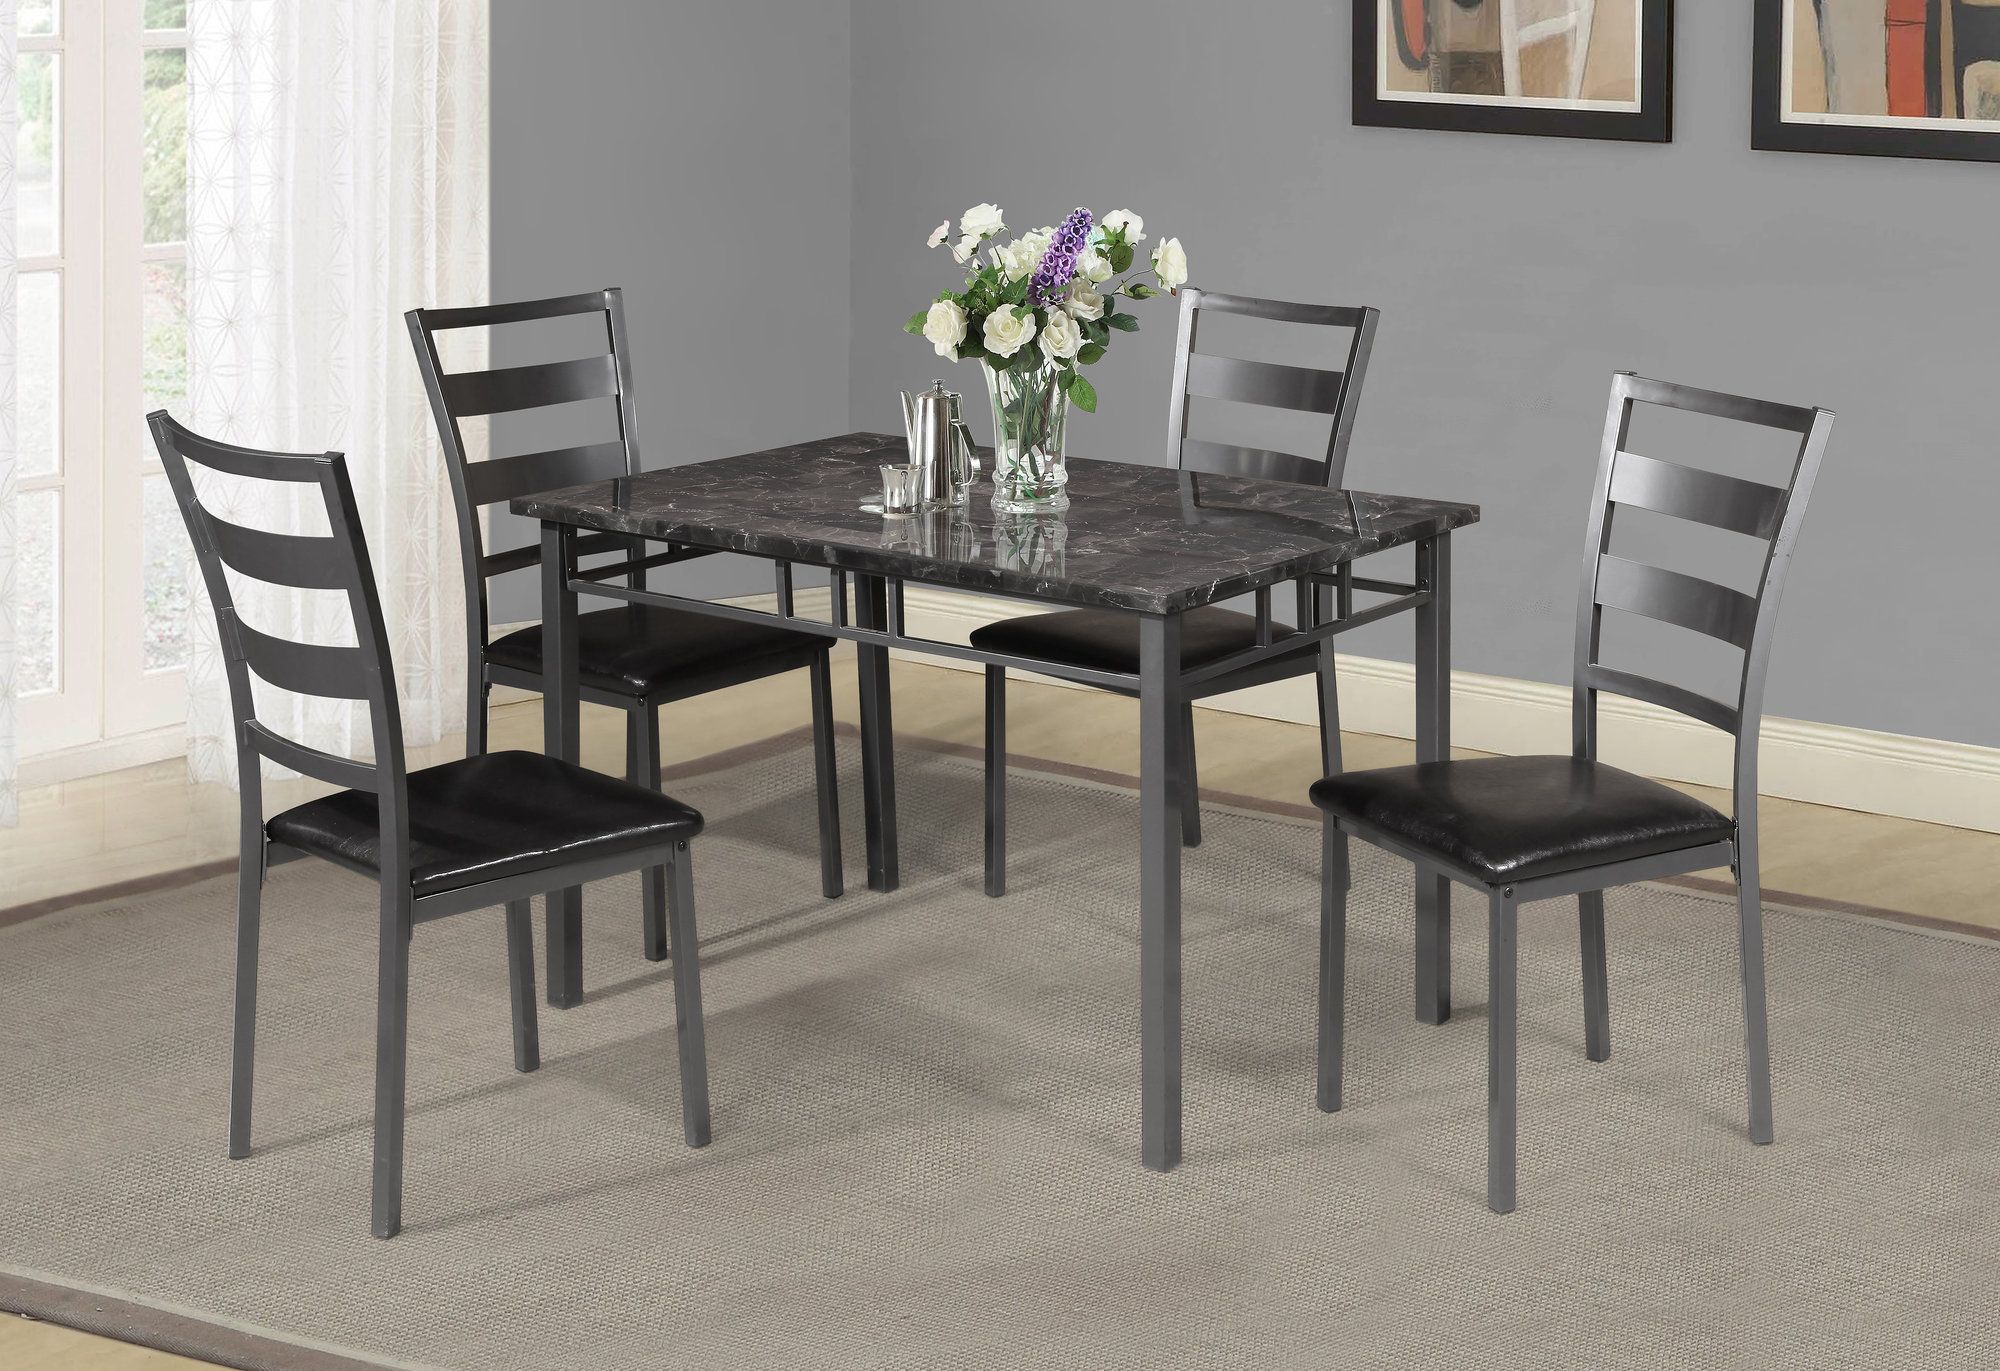 Details About Winston Porter Berke 5 Piece Dining Set Within Recent Miskell 5 Piece Dining Sets (View 5 of 20)